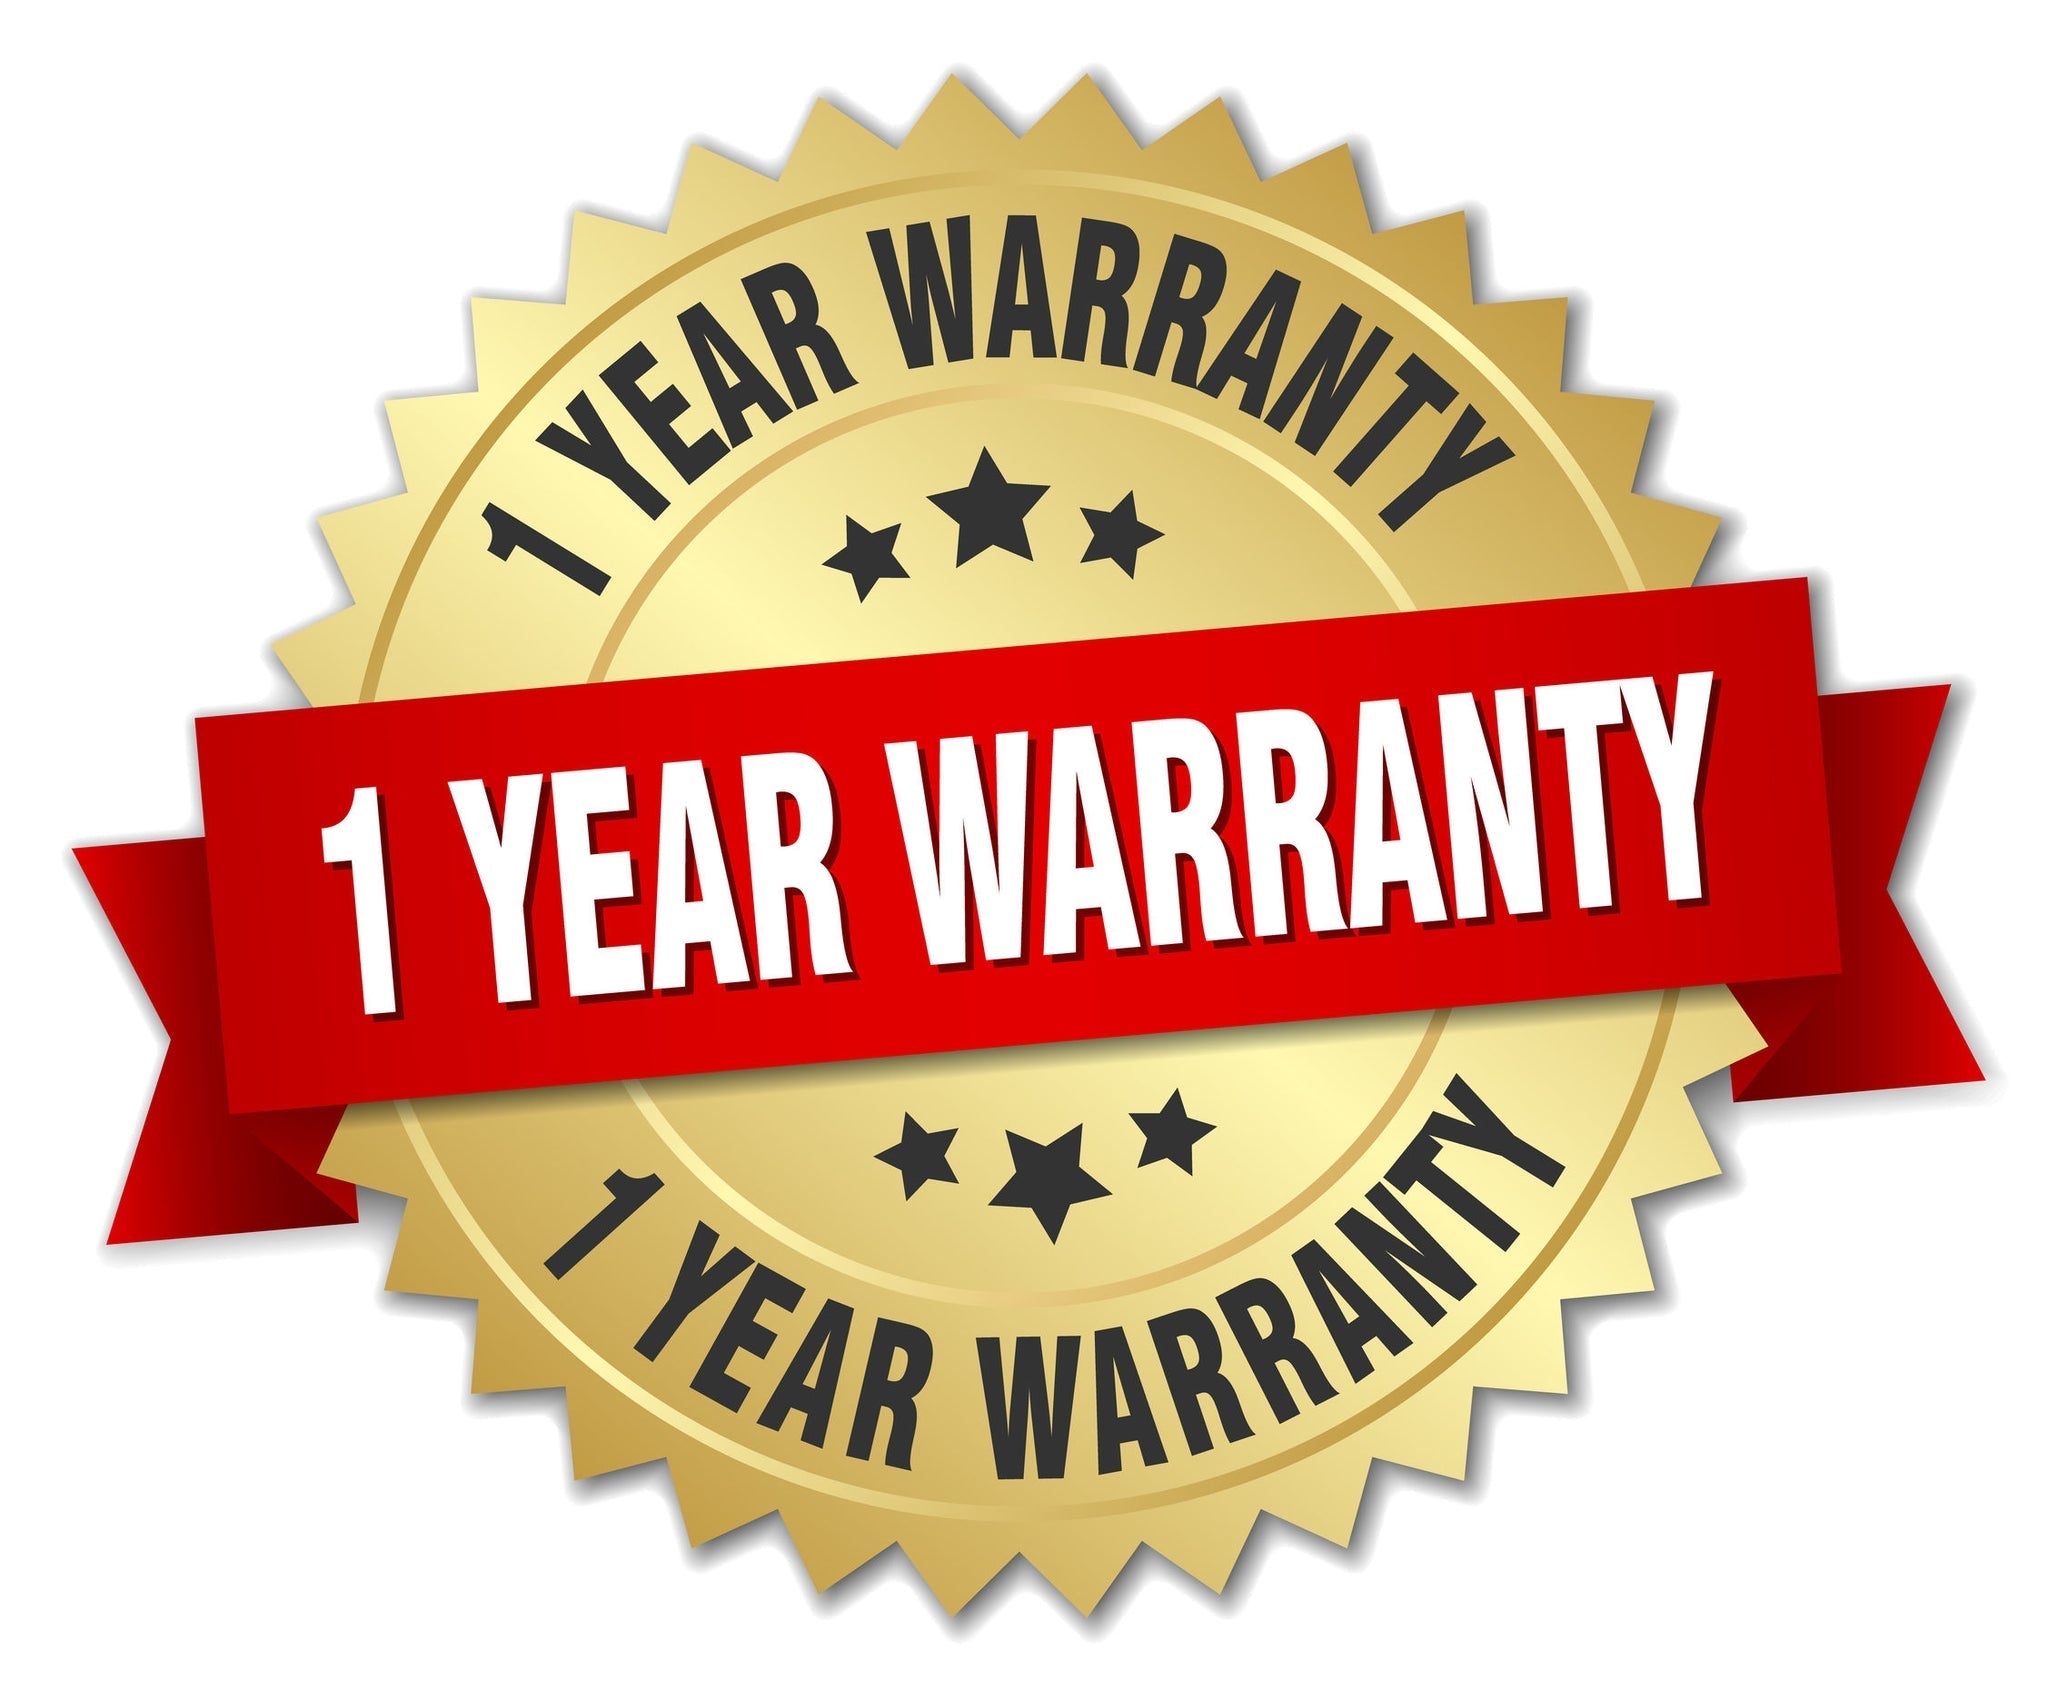 EXTEND YOUR WARRANTY FOR ONE YEAR!